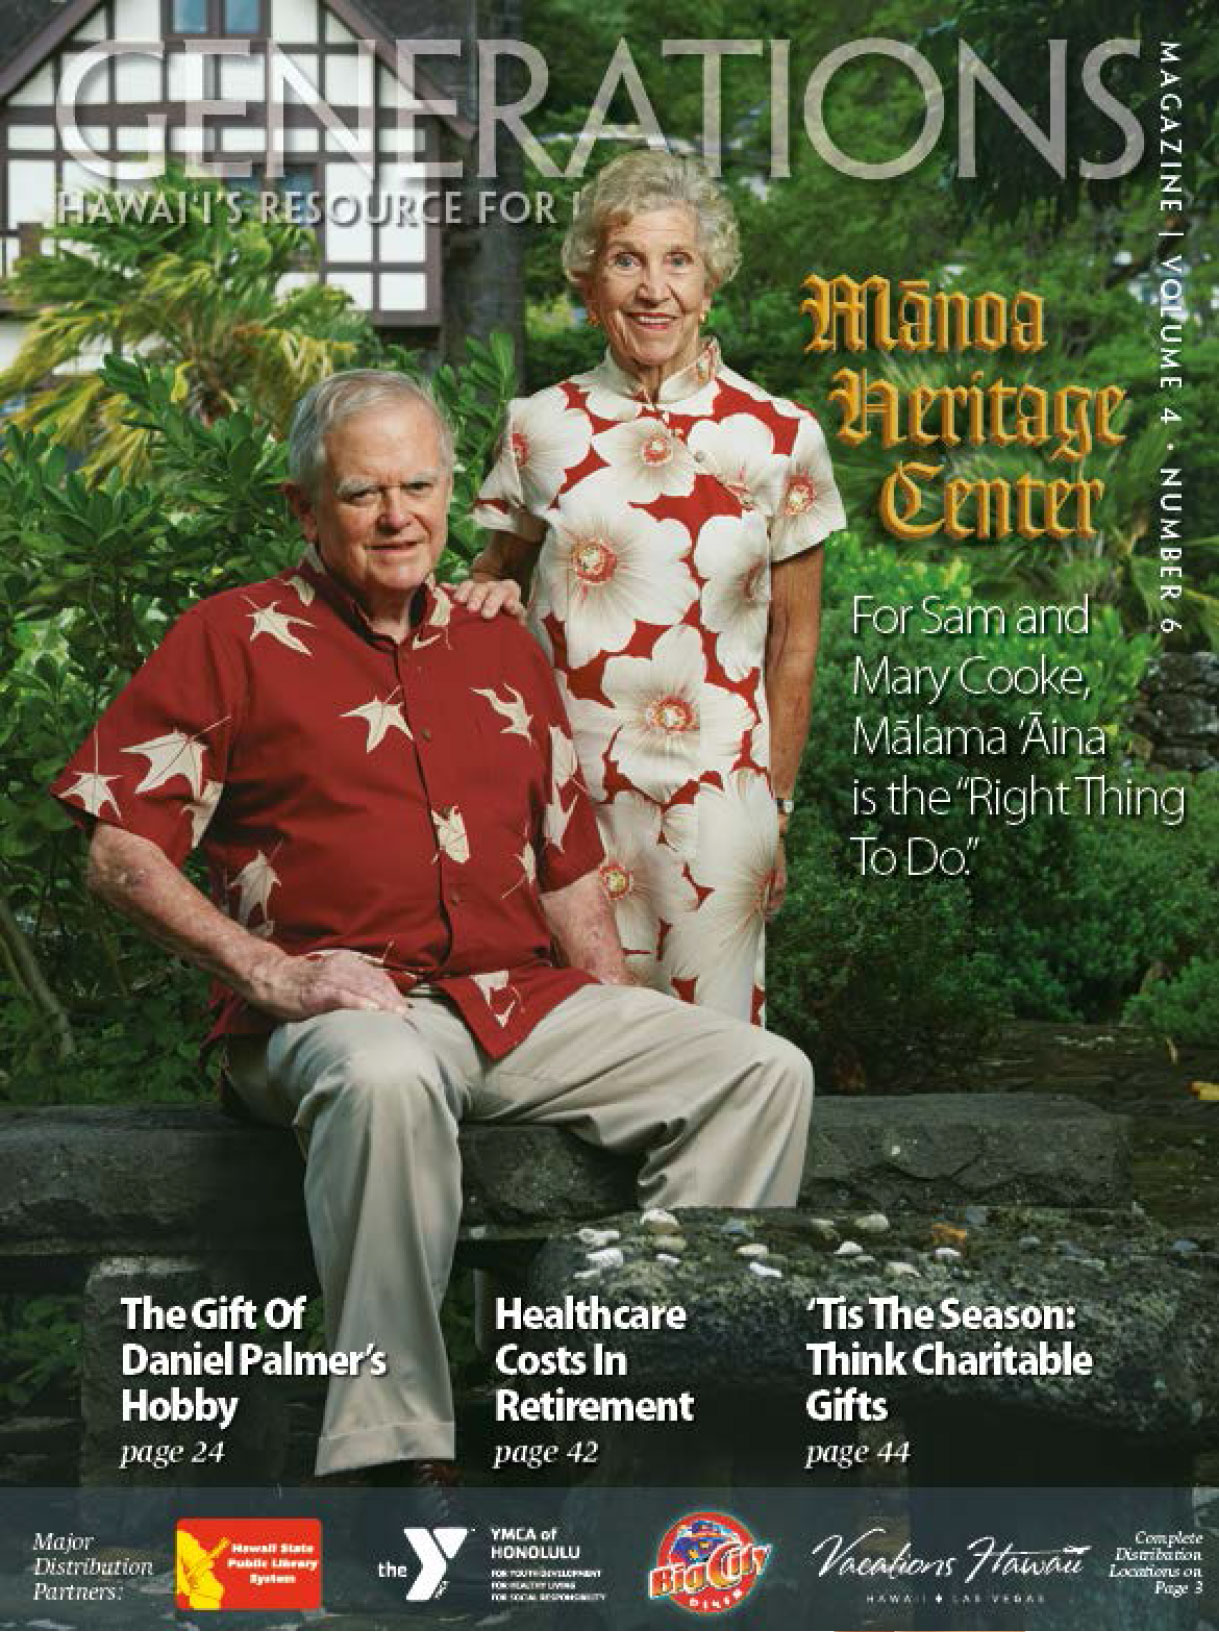 Manoa Heritage Center: For Sam and Mary Cooke, Malama ‘Aina is the “Right Thing To Do.”